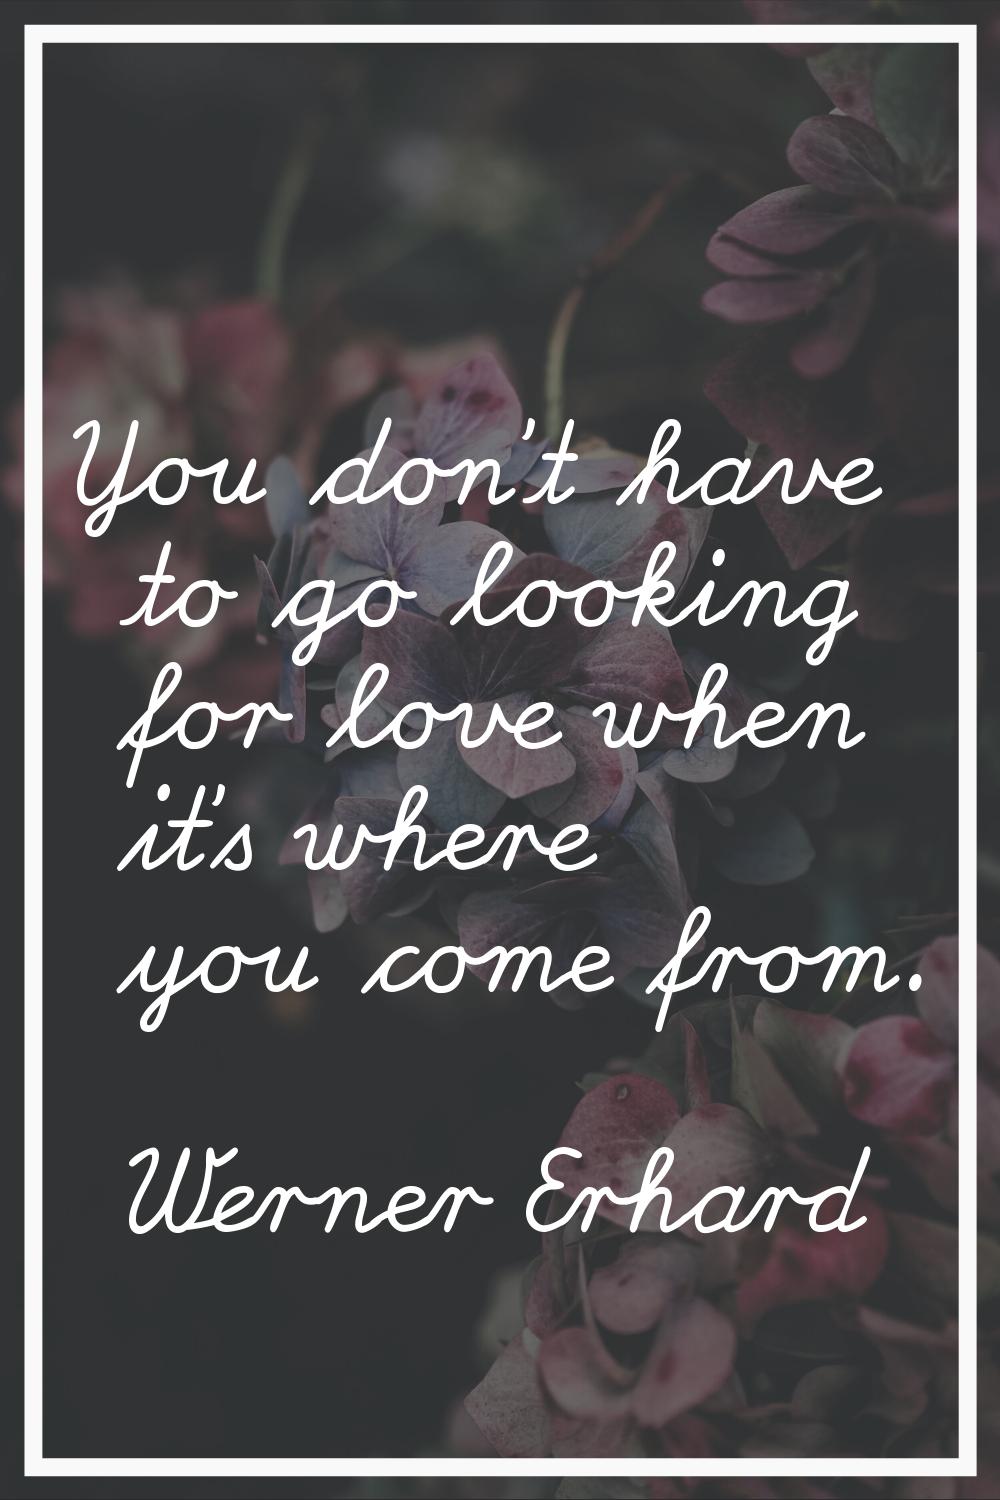 You don't have to go looking for love when it's where you come from.